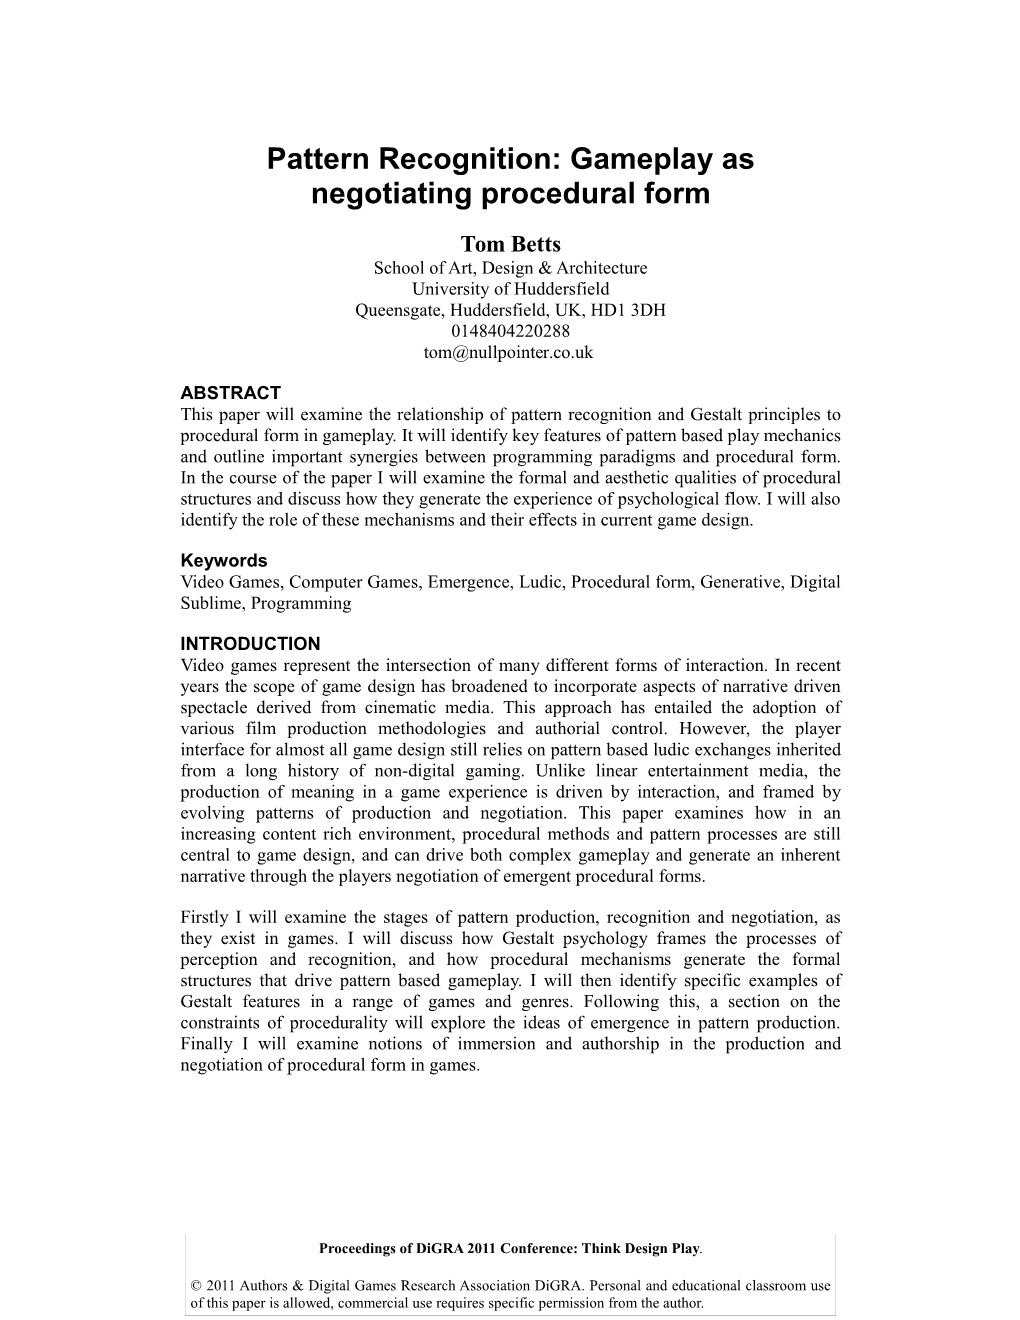 Pattern Recognition: Gameplay As Negotiating Procedural Form